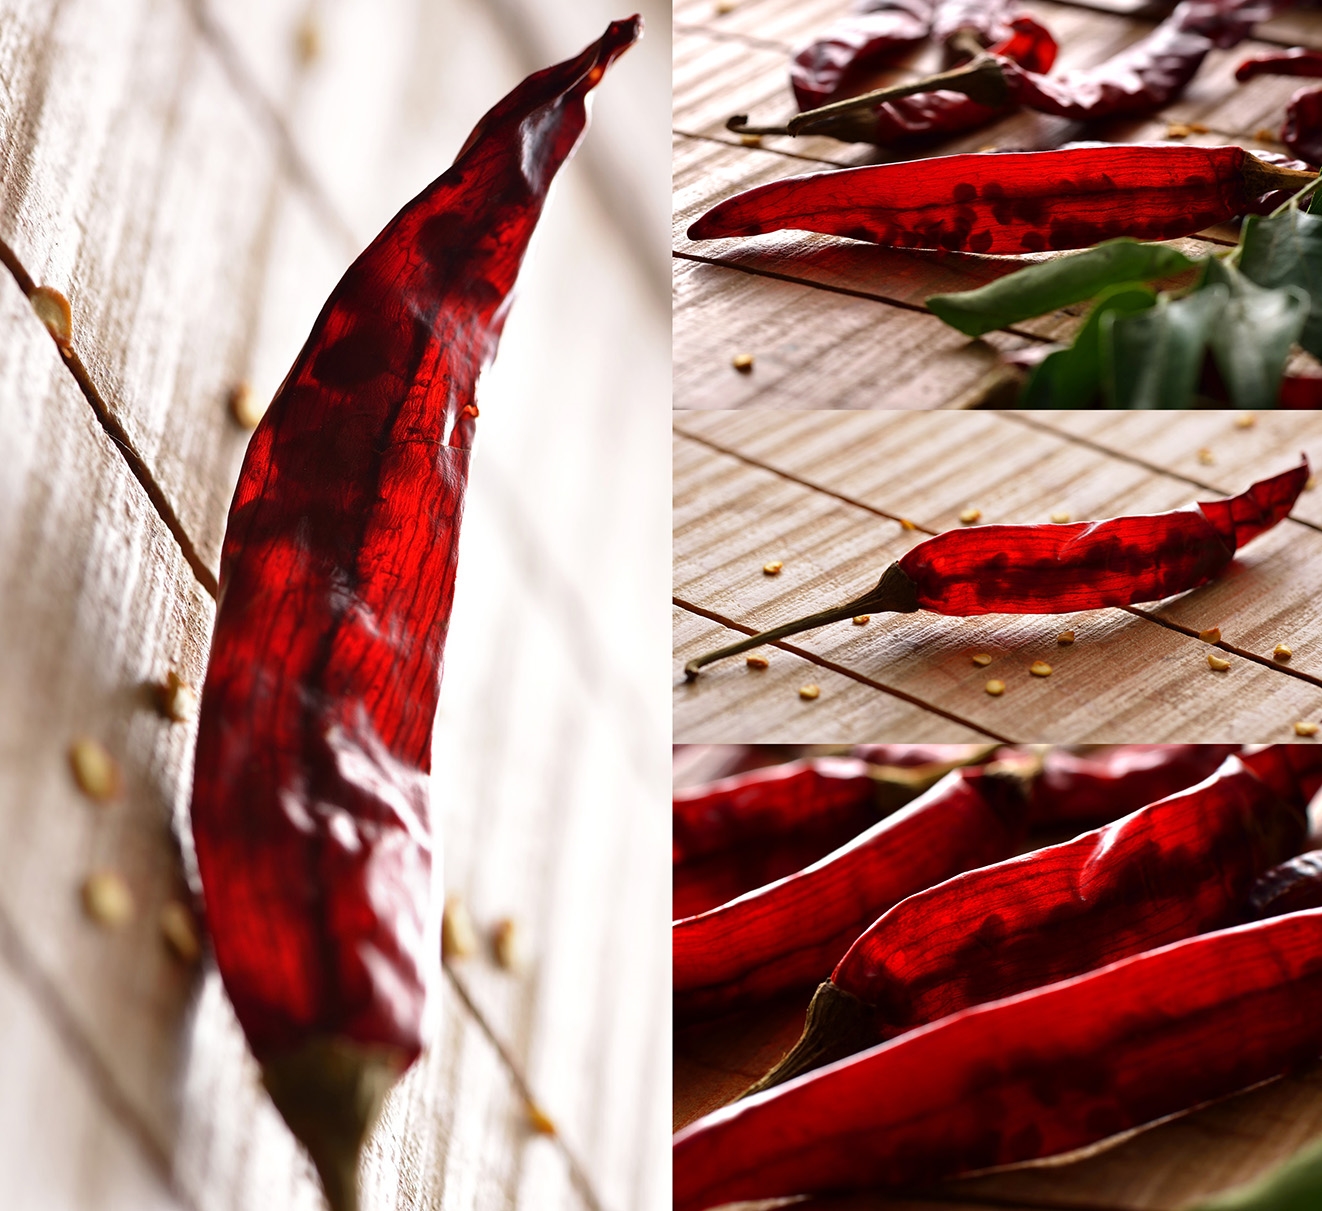 Foodstyling for Packaging red chili peppers or dried chili peppers